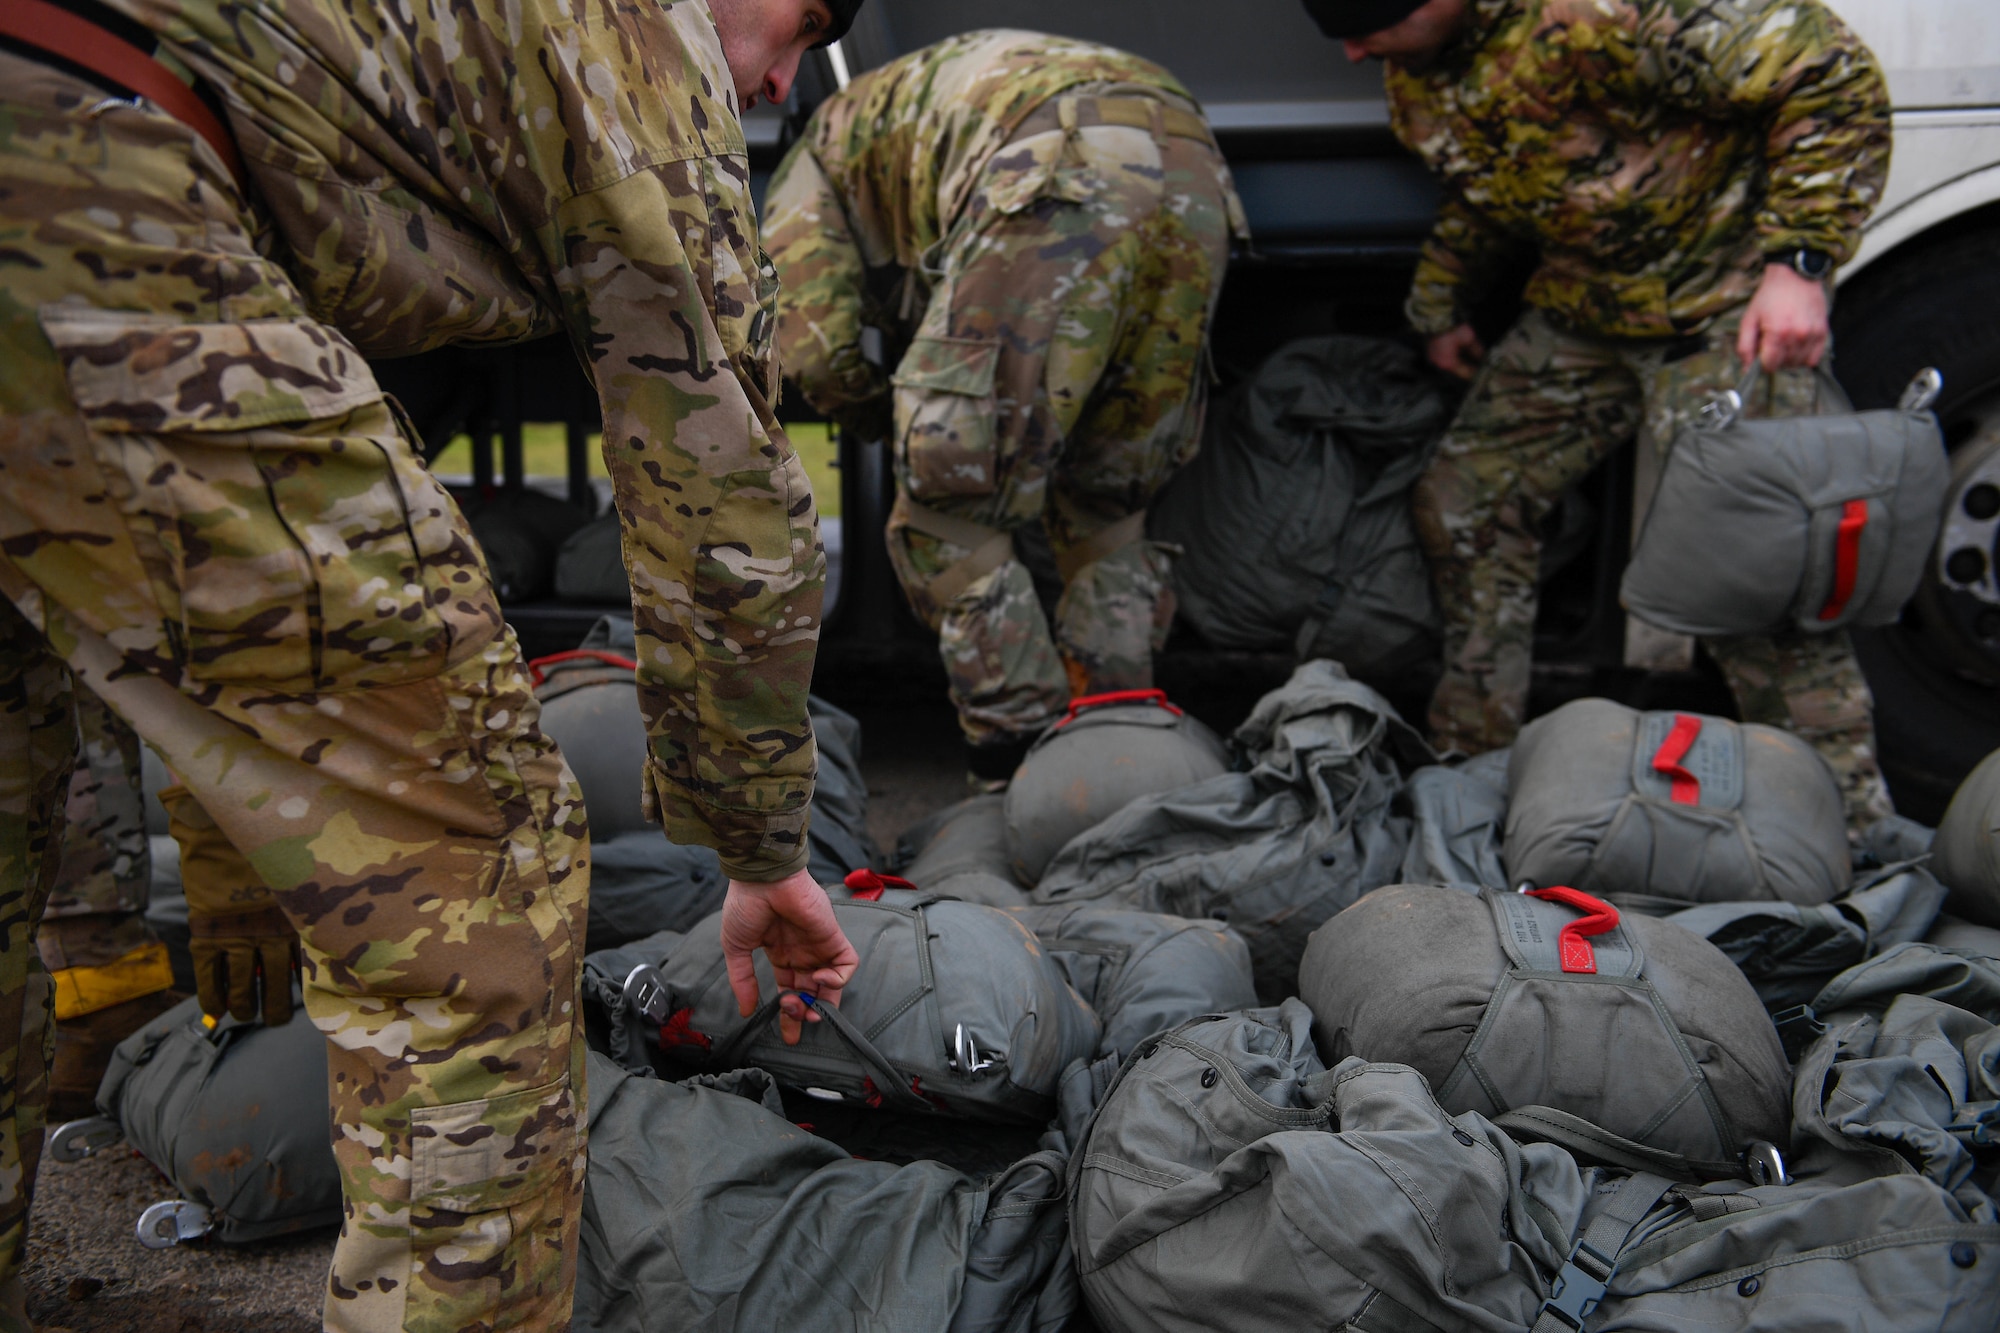 U.S. Air Force paratroopers from the 435th Contingency Response Group pack their parachutes into a bus after jumping into the Alzey Drop Zone in Ober-Flörsheim, Germany, Jan. 20, 2023.